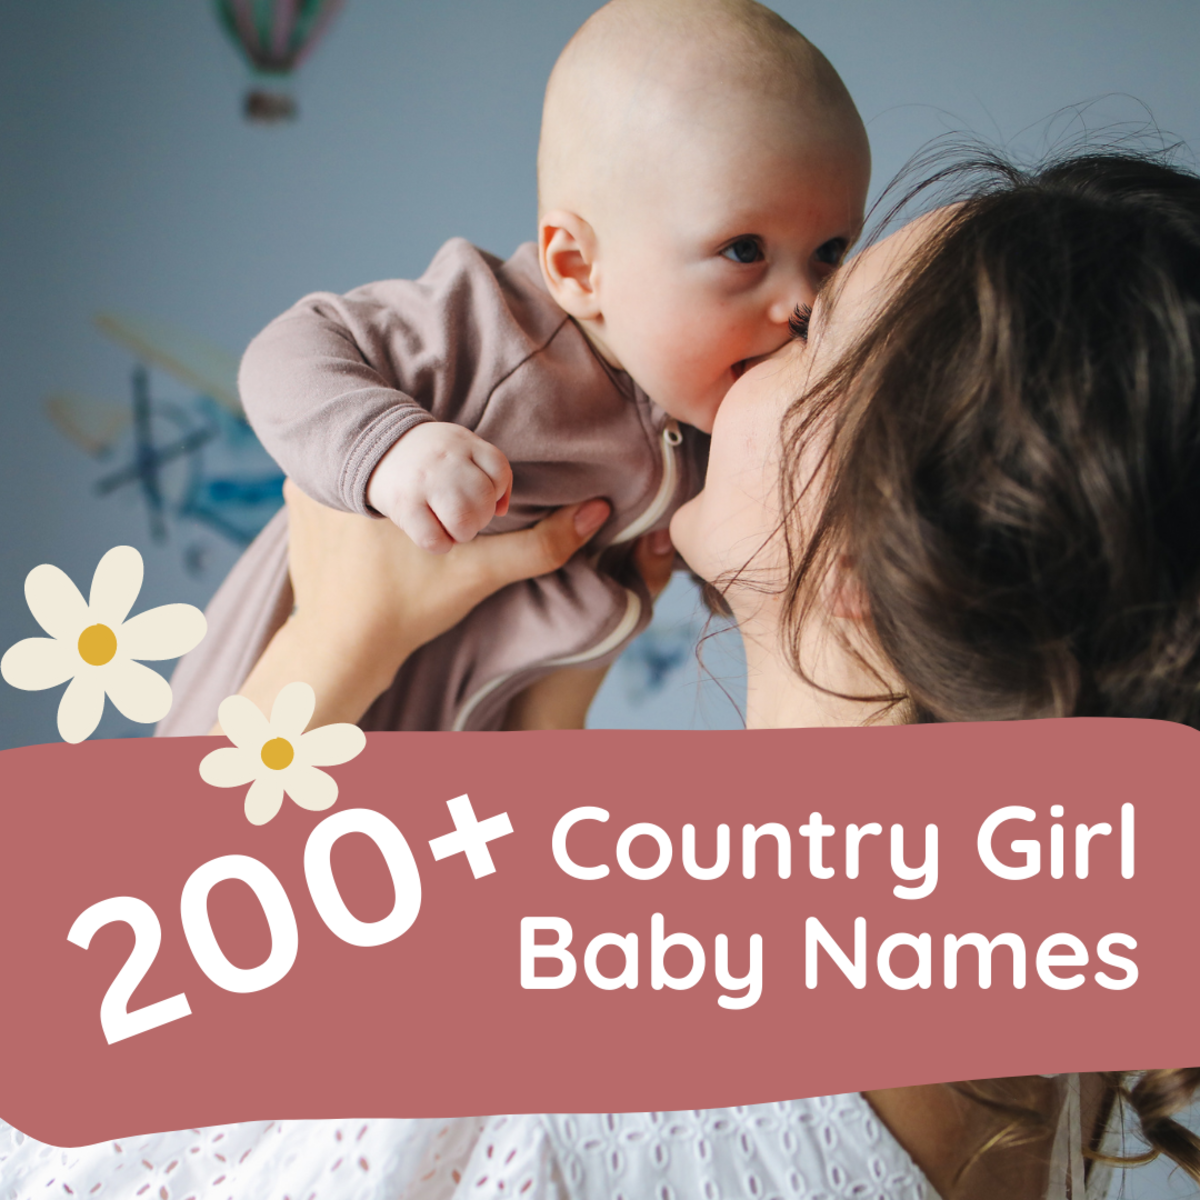 200+ Country Girl Baby Names